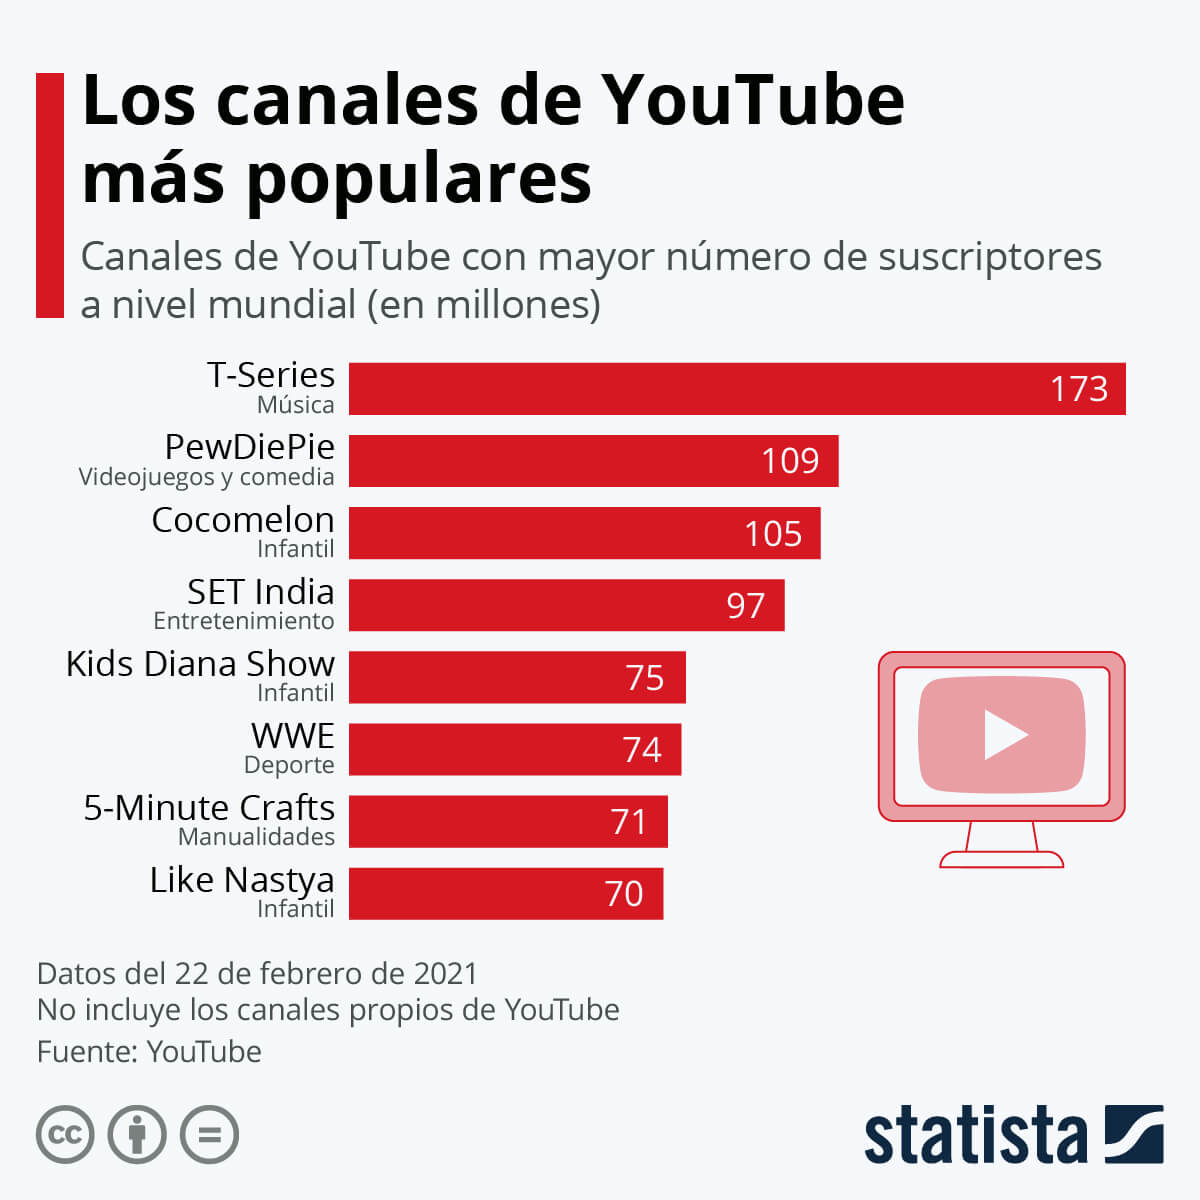 youtubers with most views and subscribers